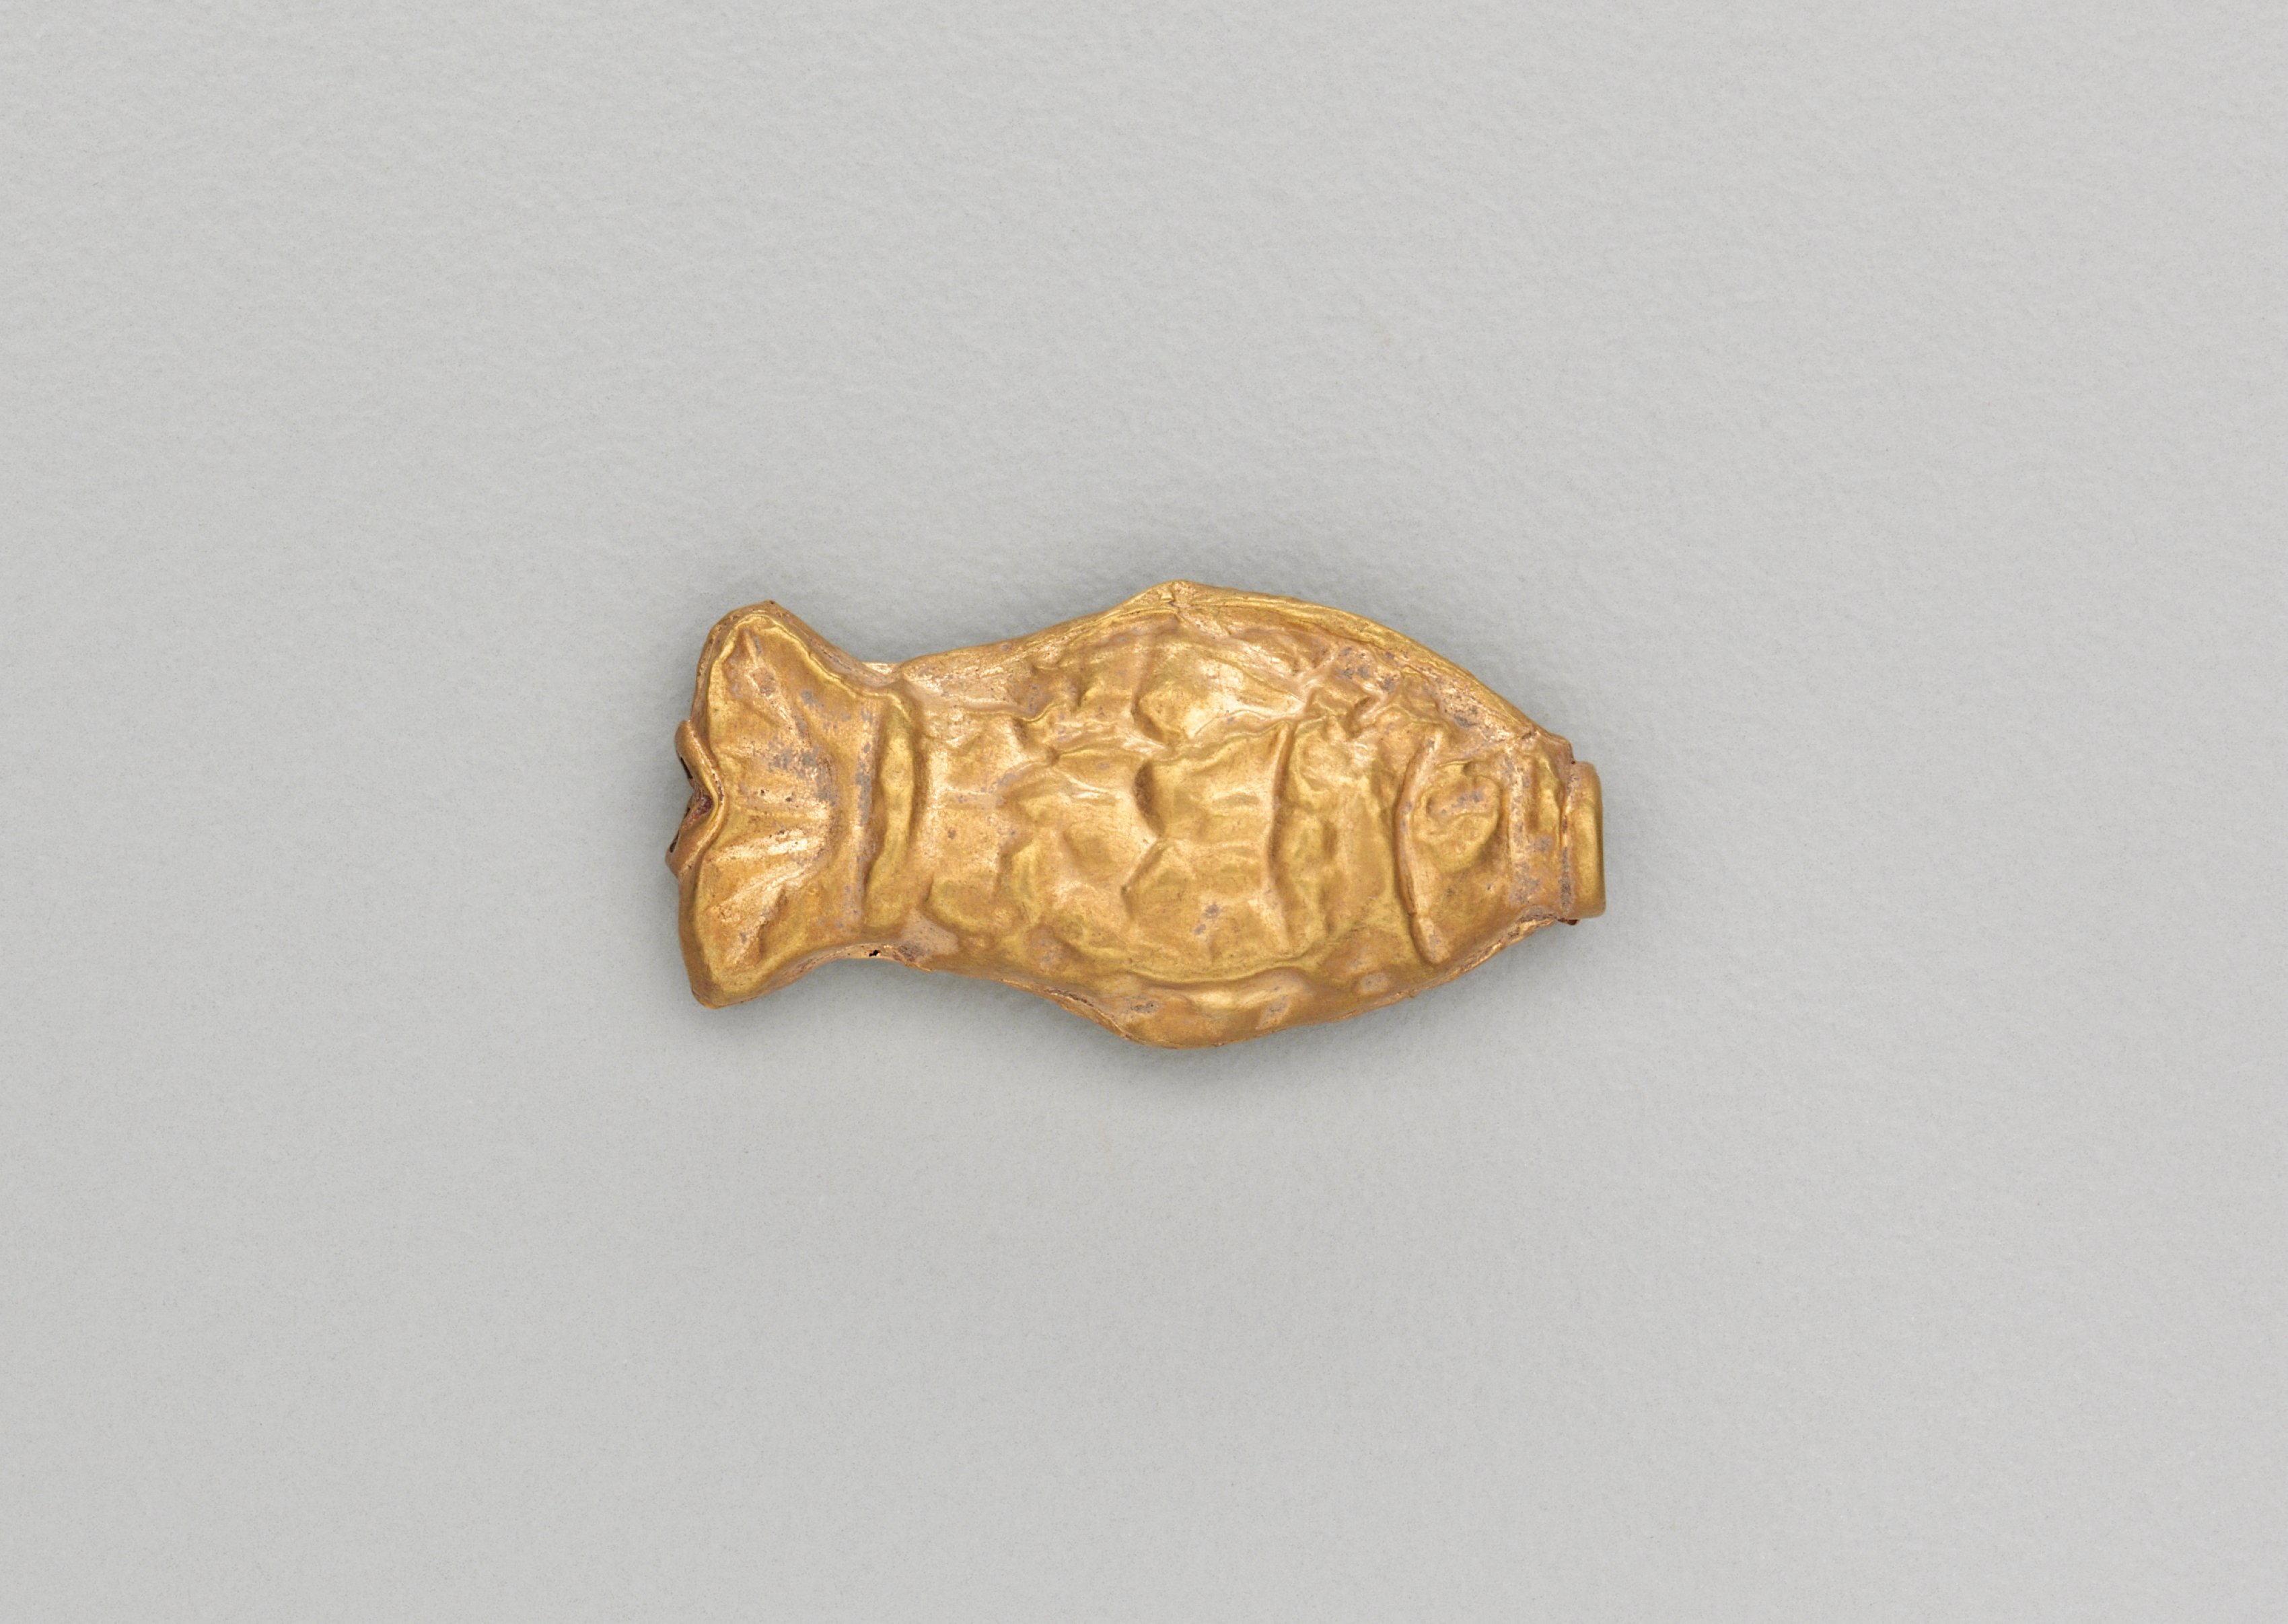 Necklace Bead in the Form of a Fish